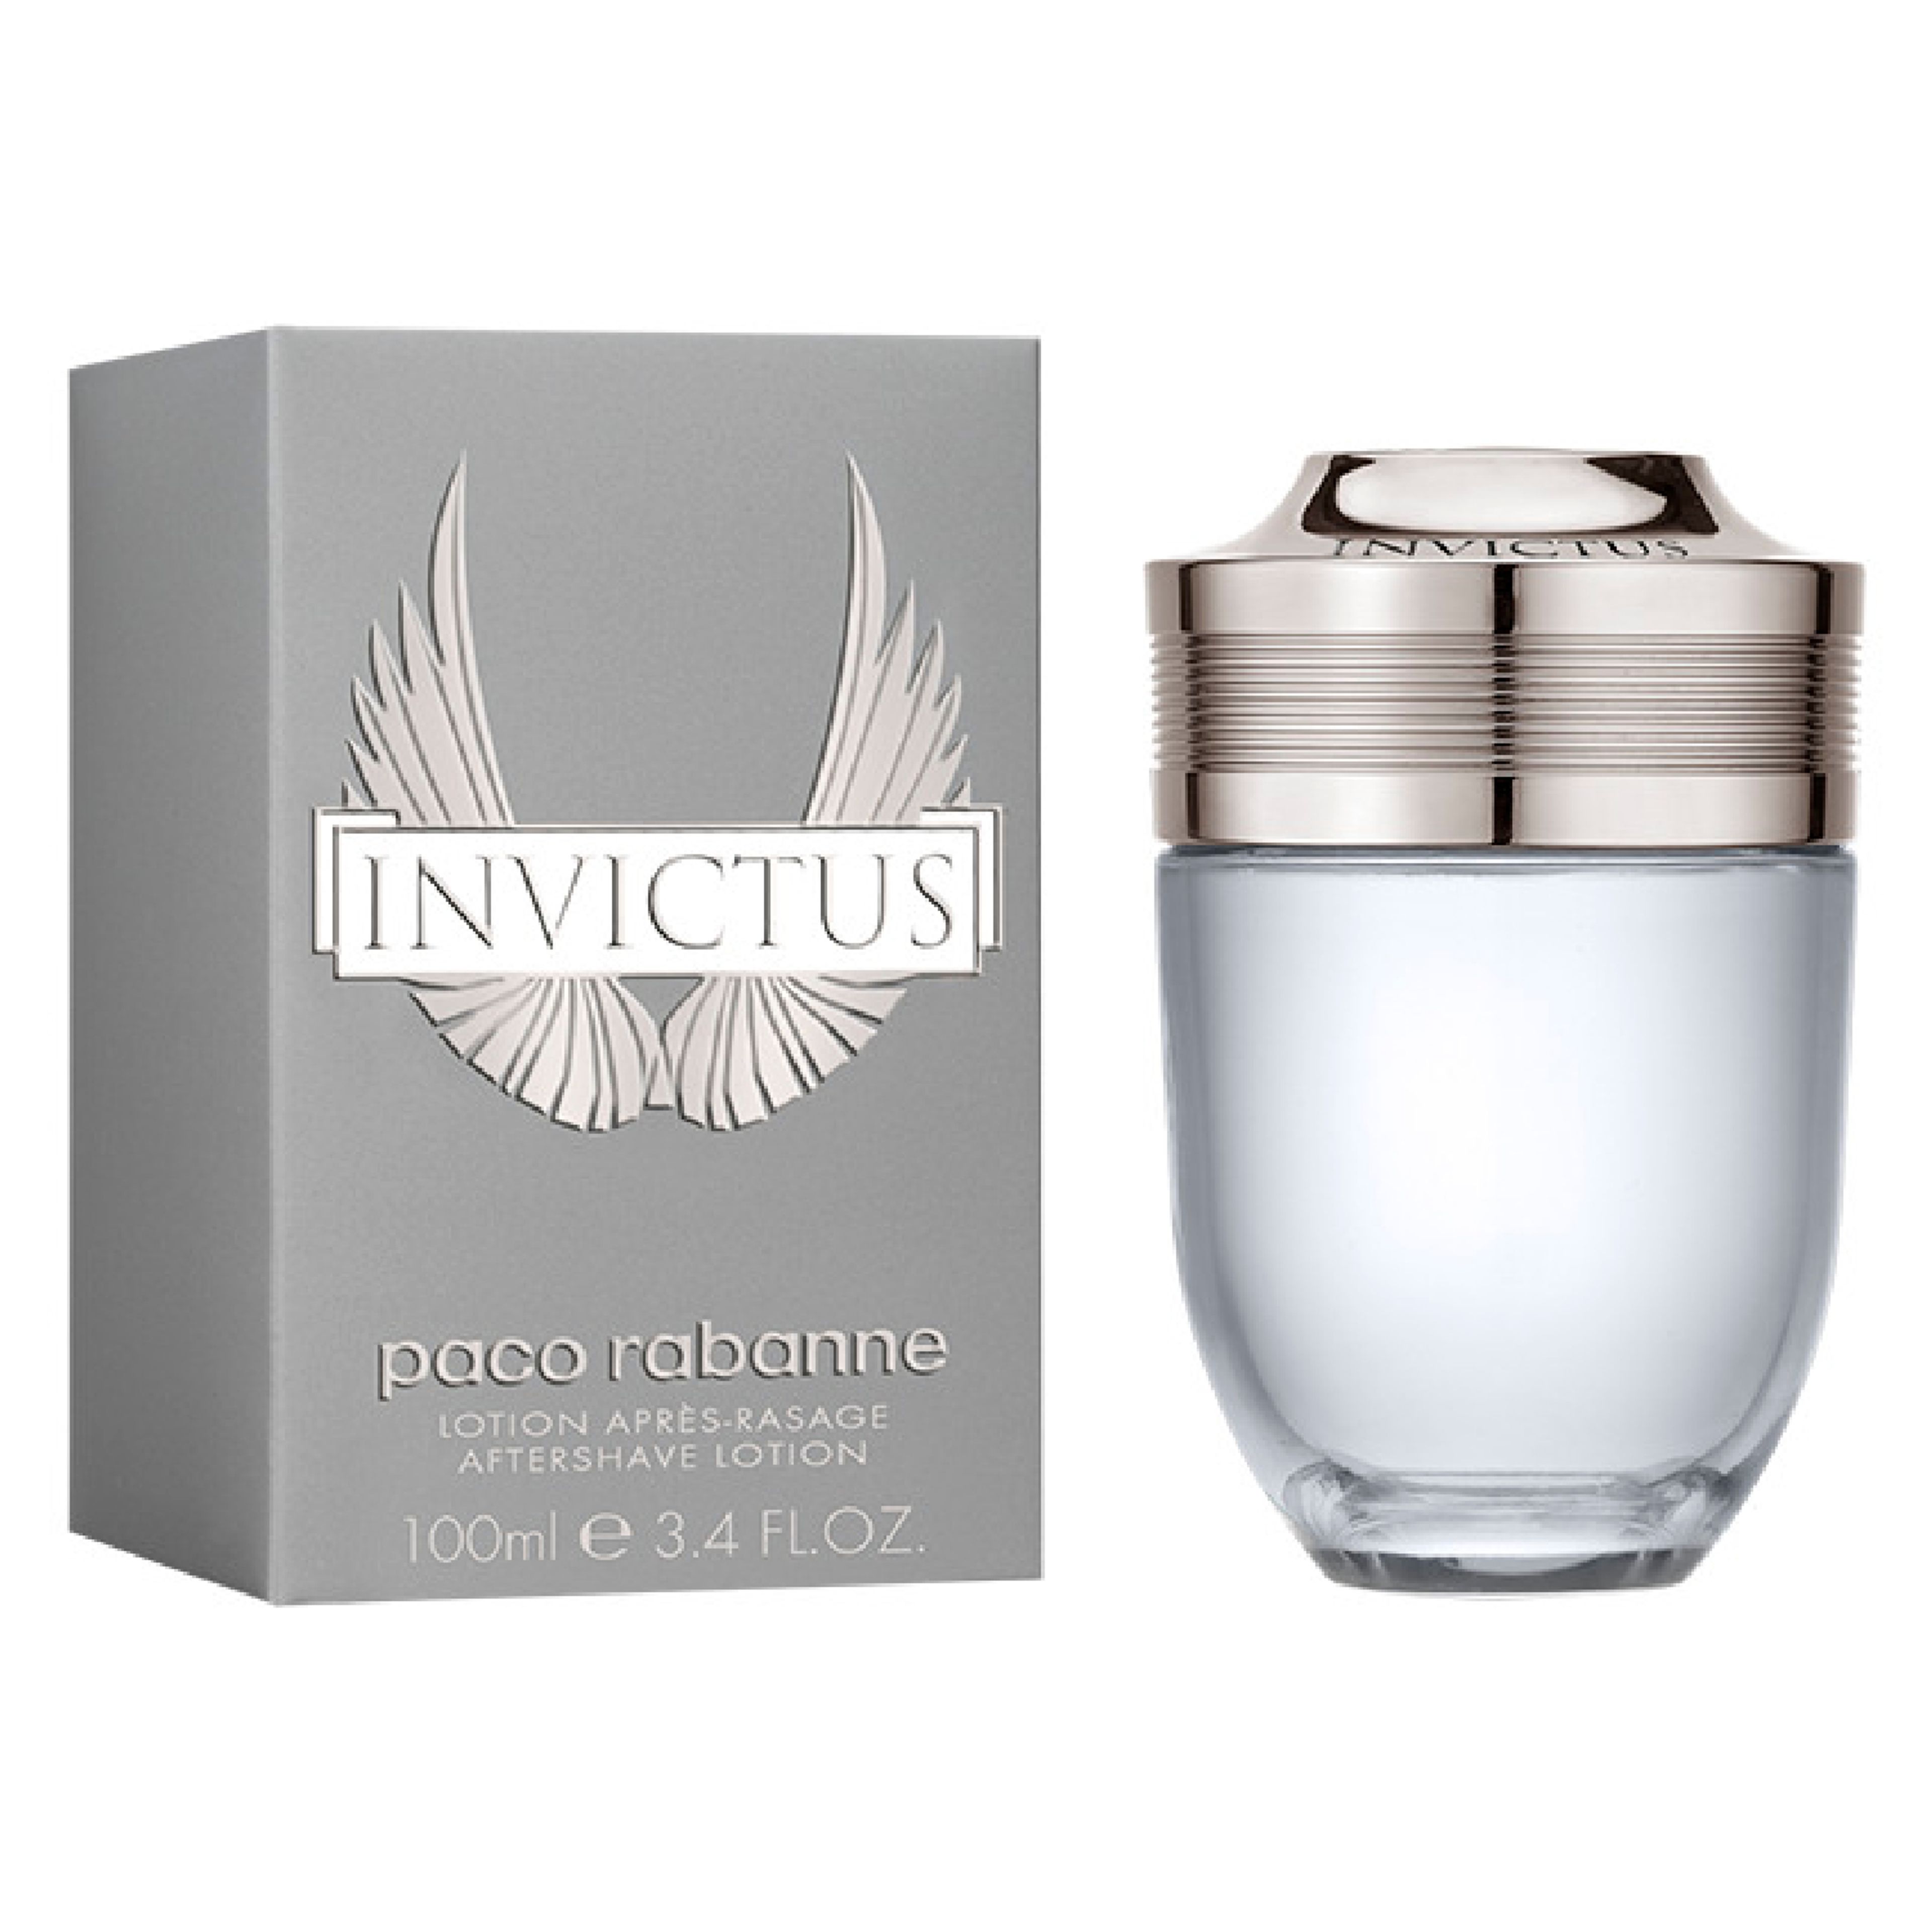 Rabanne Invictus - After Shave Lotion 3